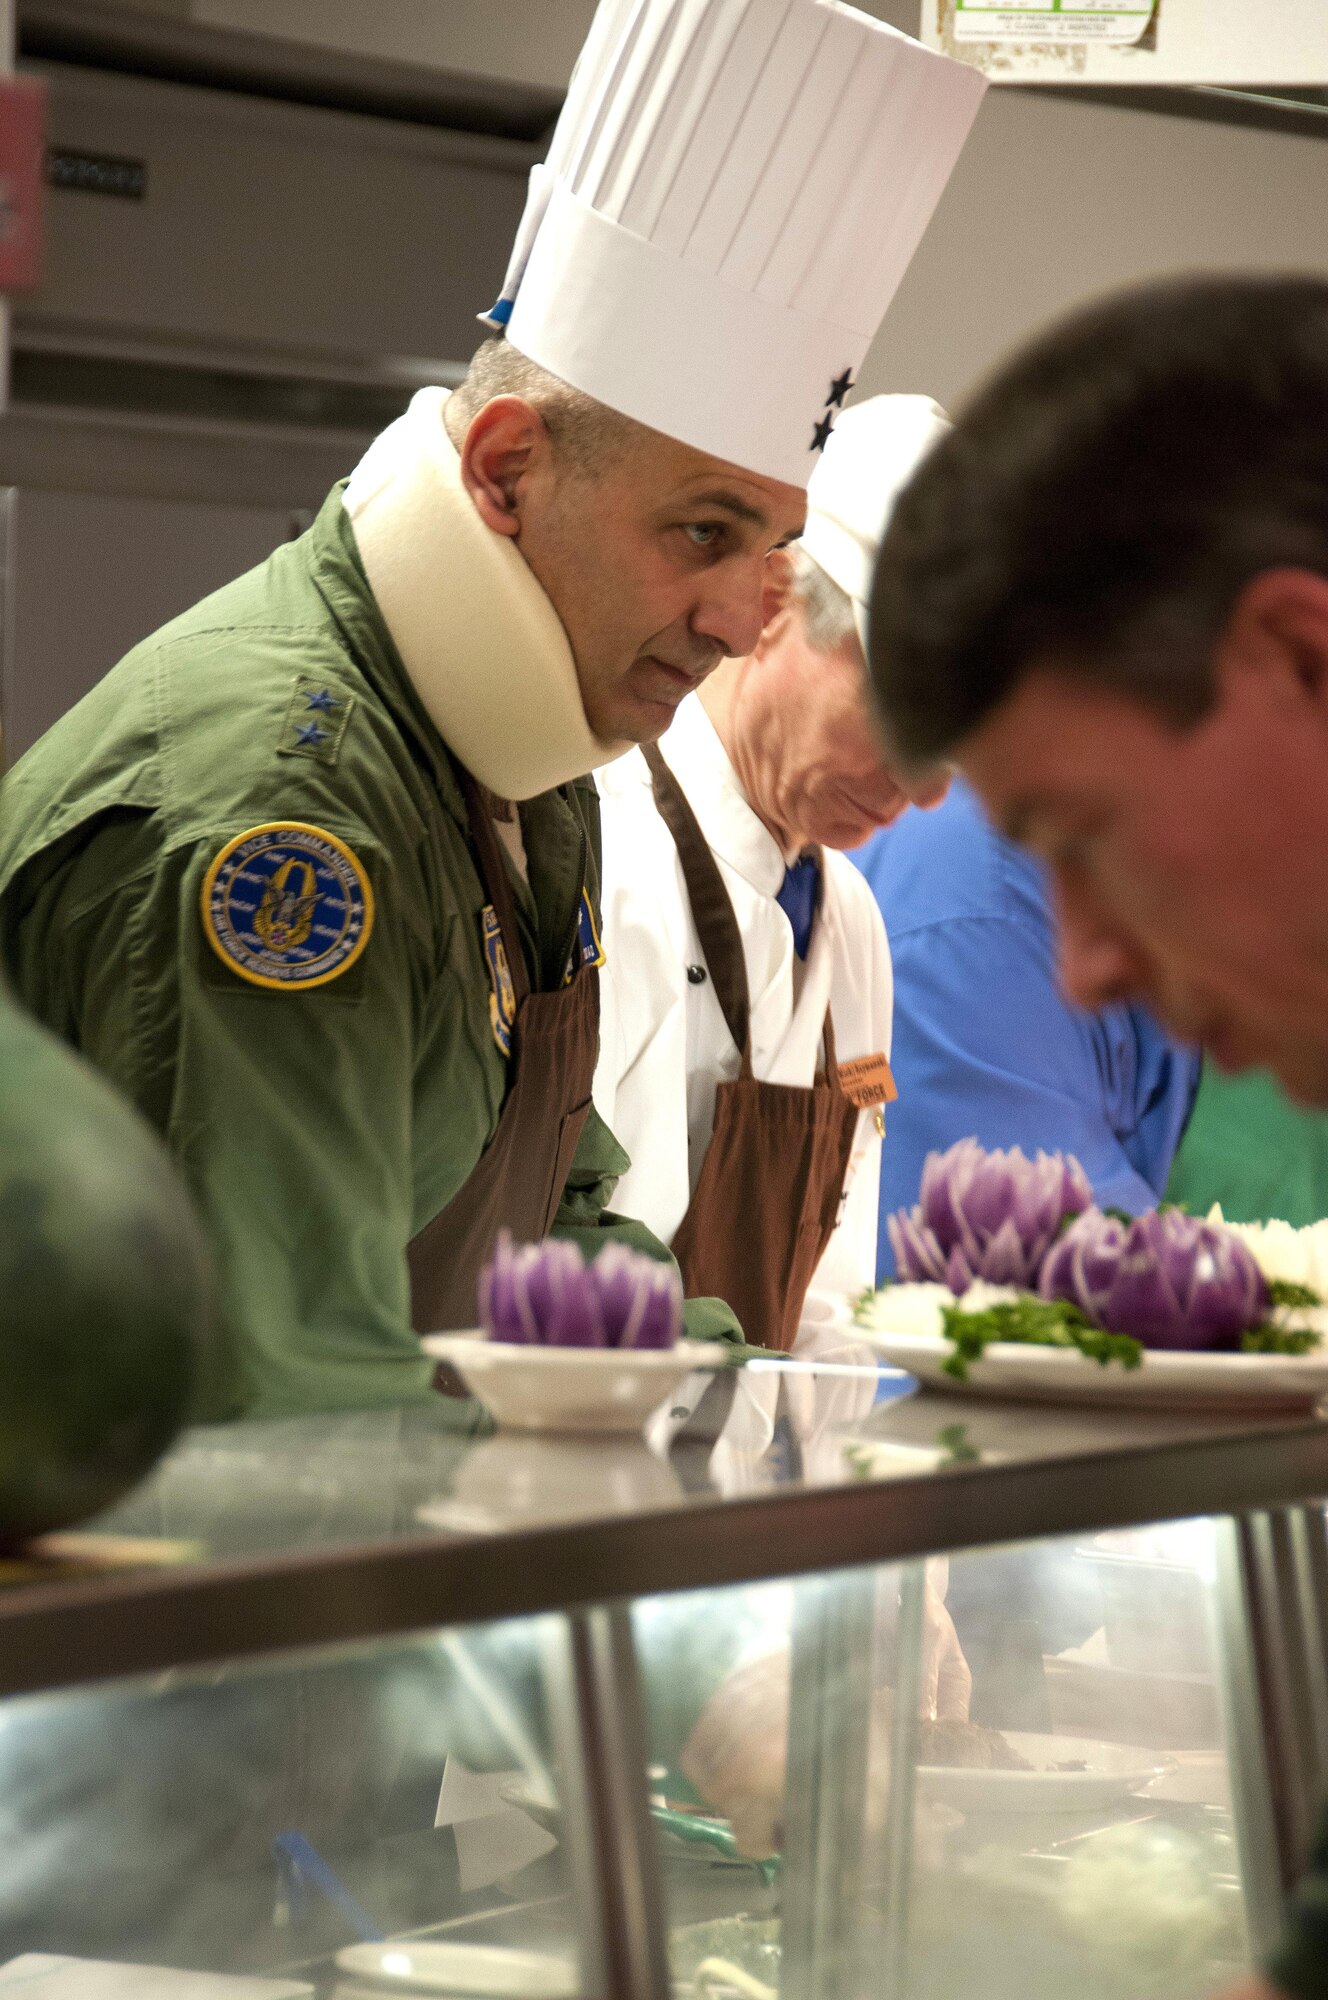 Maj. Gen. Richard S. "Beef" Haddad, Air Force Reserve Command vice commander, serves Thanksgiving lunch at the Wynn Dining Facility at Robins Air Force Base, Ga., Nov 26, 2015. Haddad volunteered to serve the special holiday lunch to service members. (U.S. Air Force photo by Robert Helton/RELEASED)